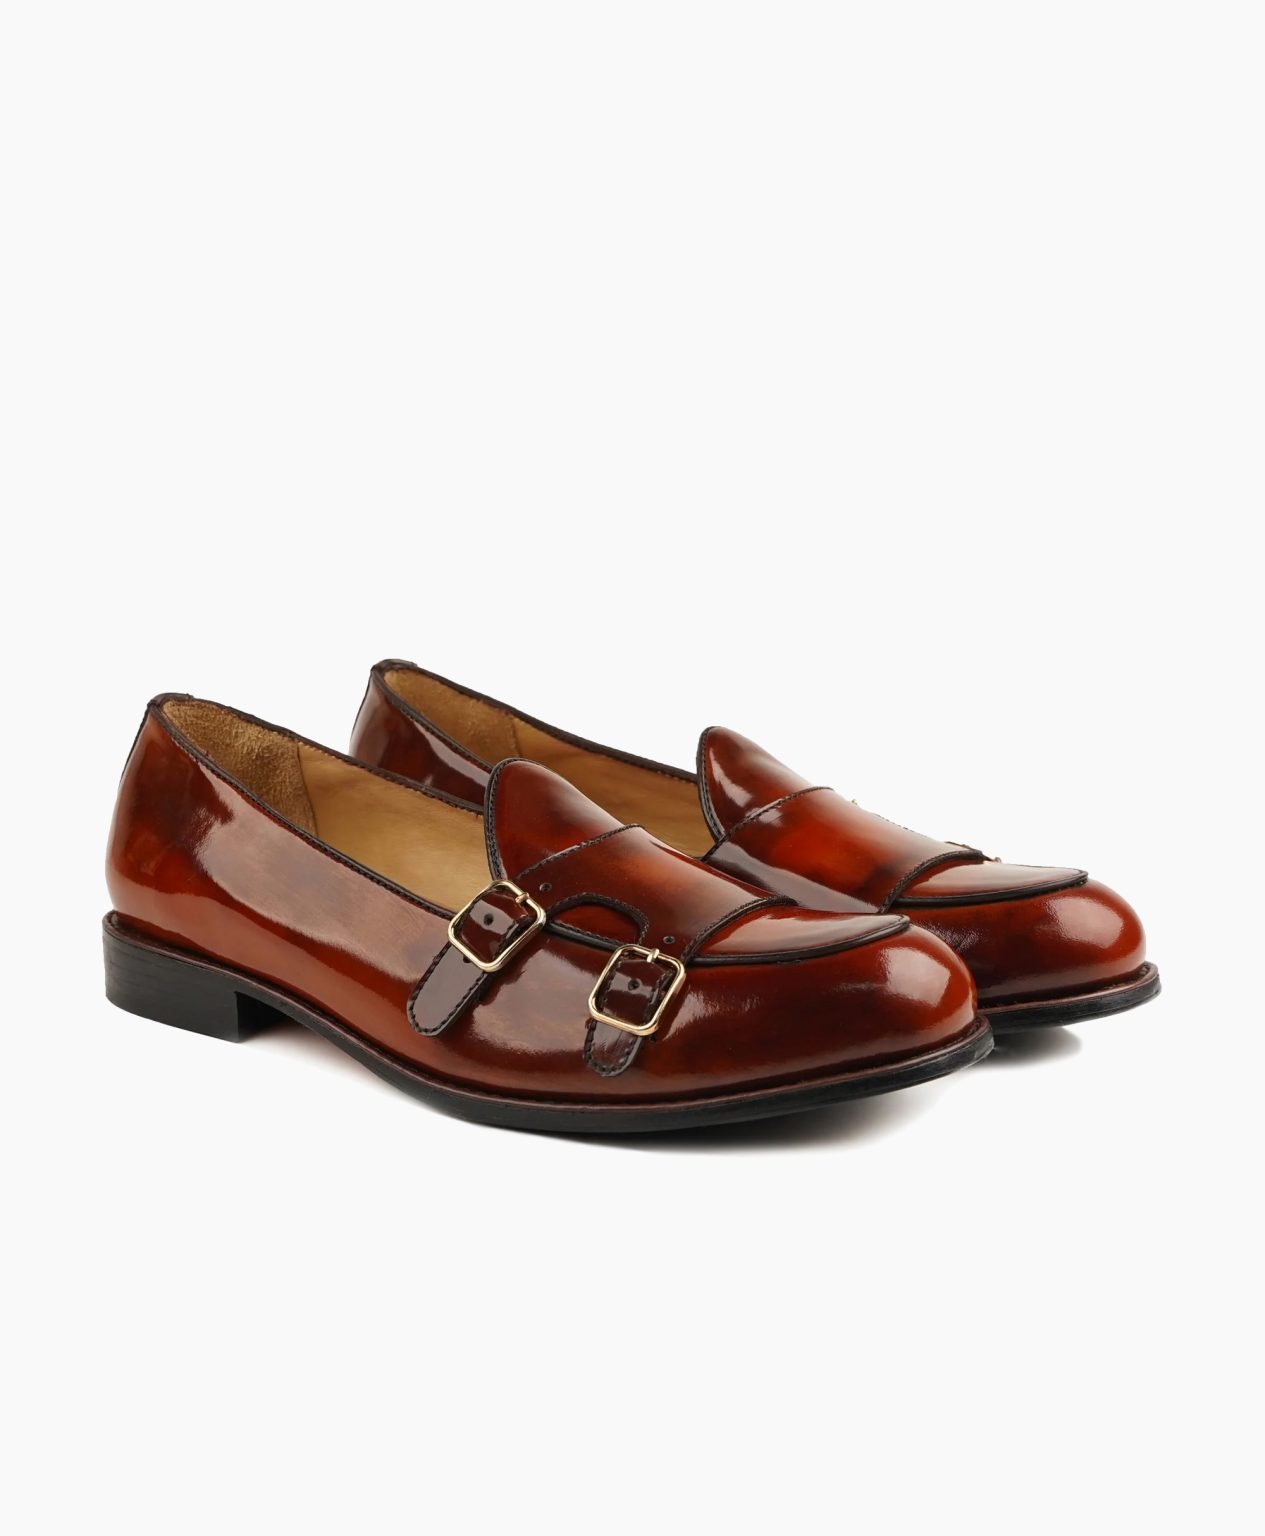 dartmouth-double-monkstrap-brown-leather-shoes-image200